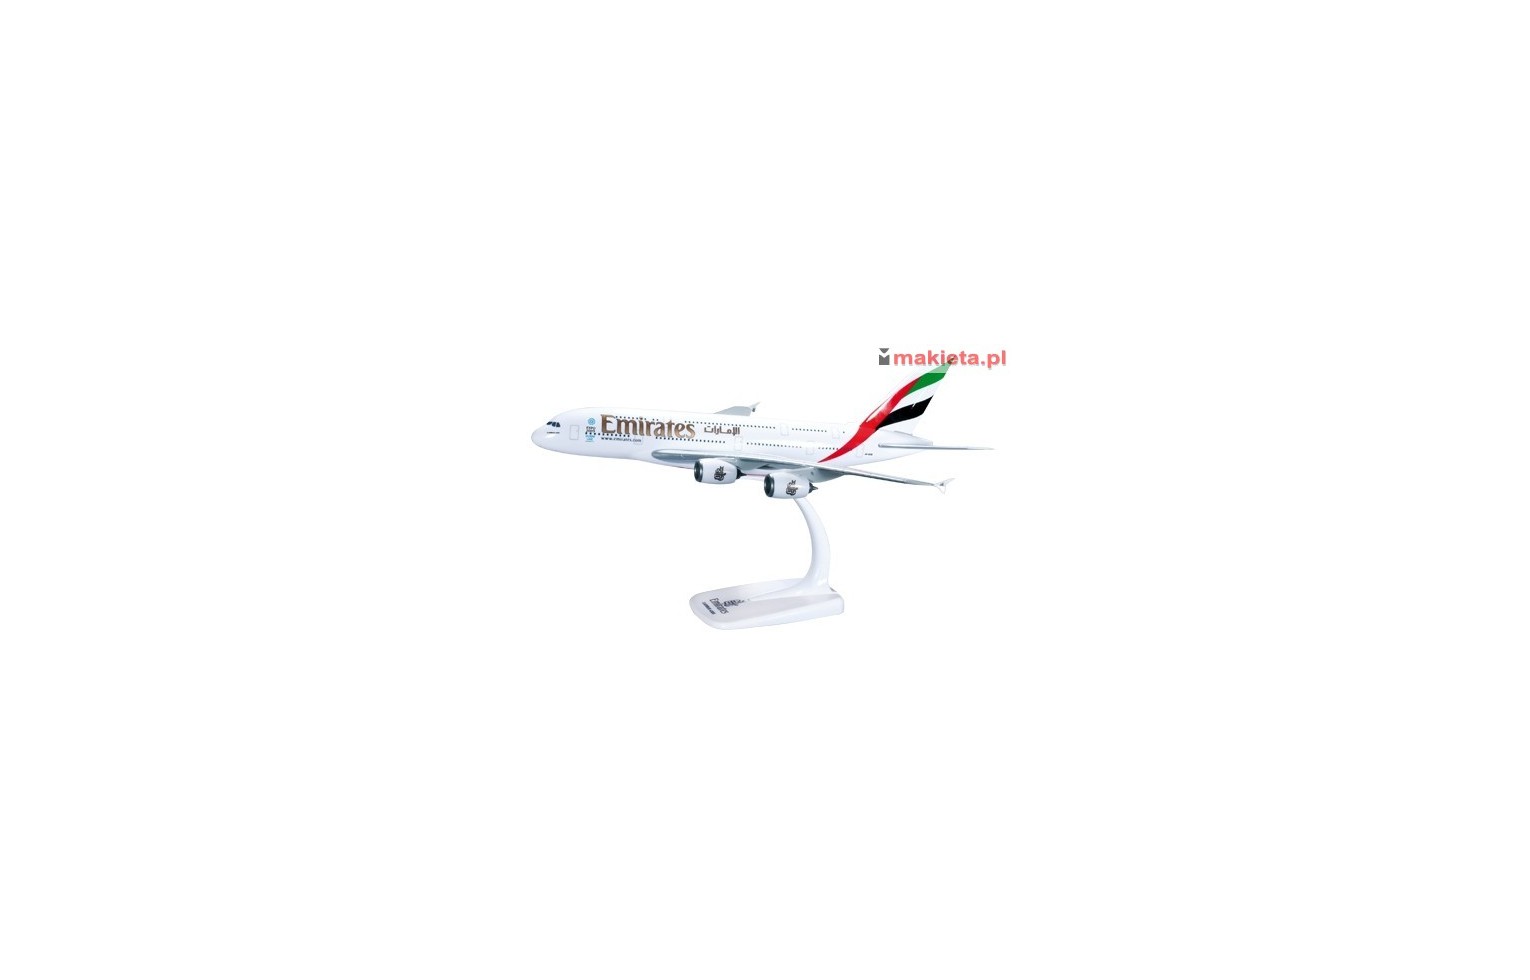 Herpa 607018, Emirates Airbus A380-800, 1:250